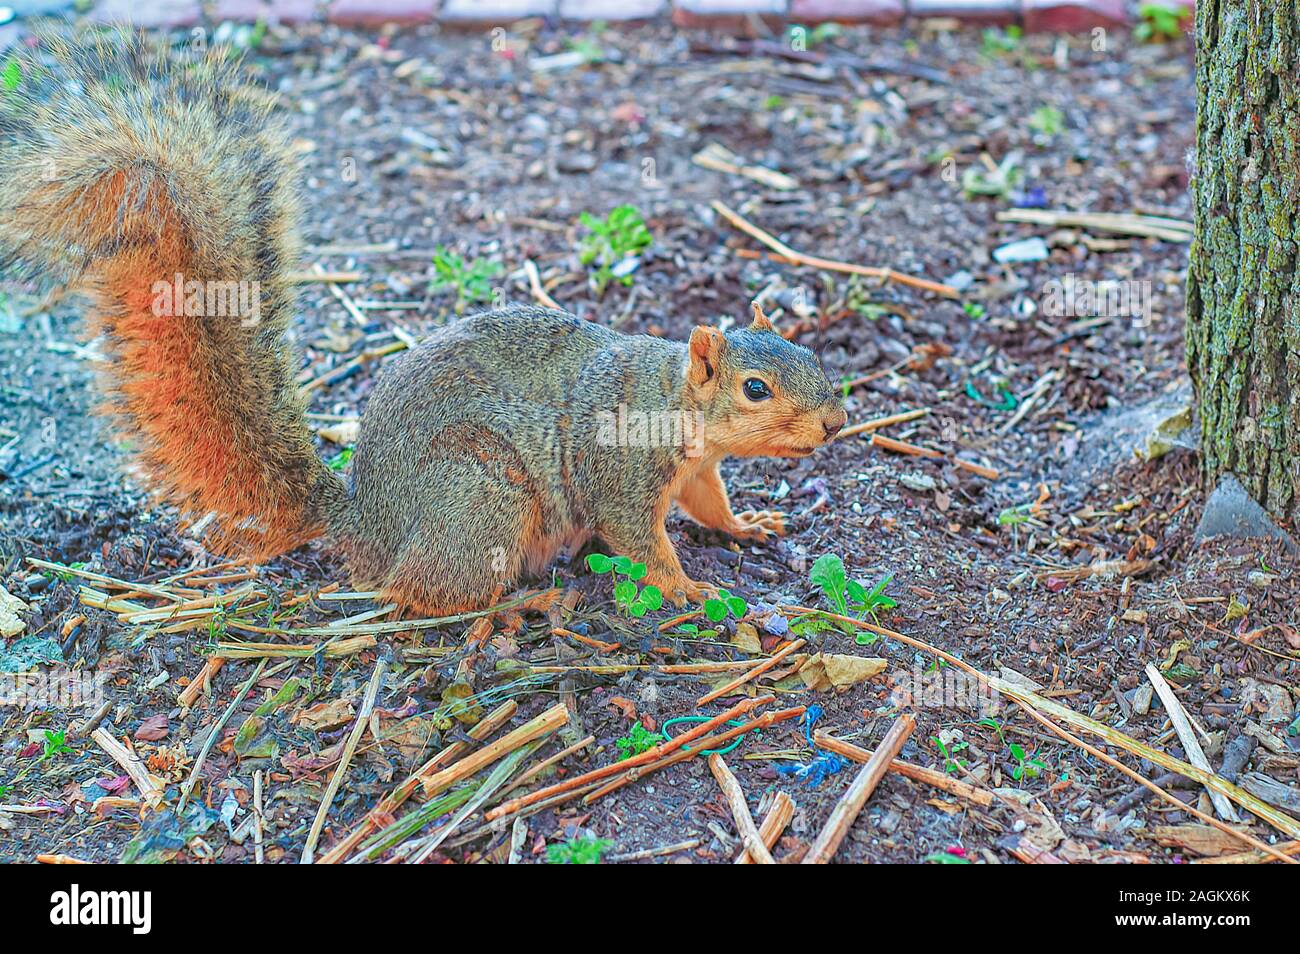 A foraging fox squirrel—Sciurus niger—also known as the eastern fox squirrel or Bryant's fox squirrel in an urban environment. Stock Photo